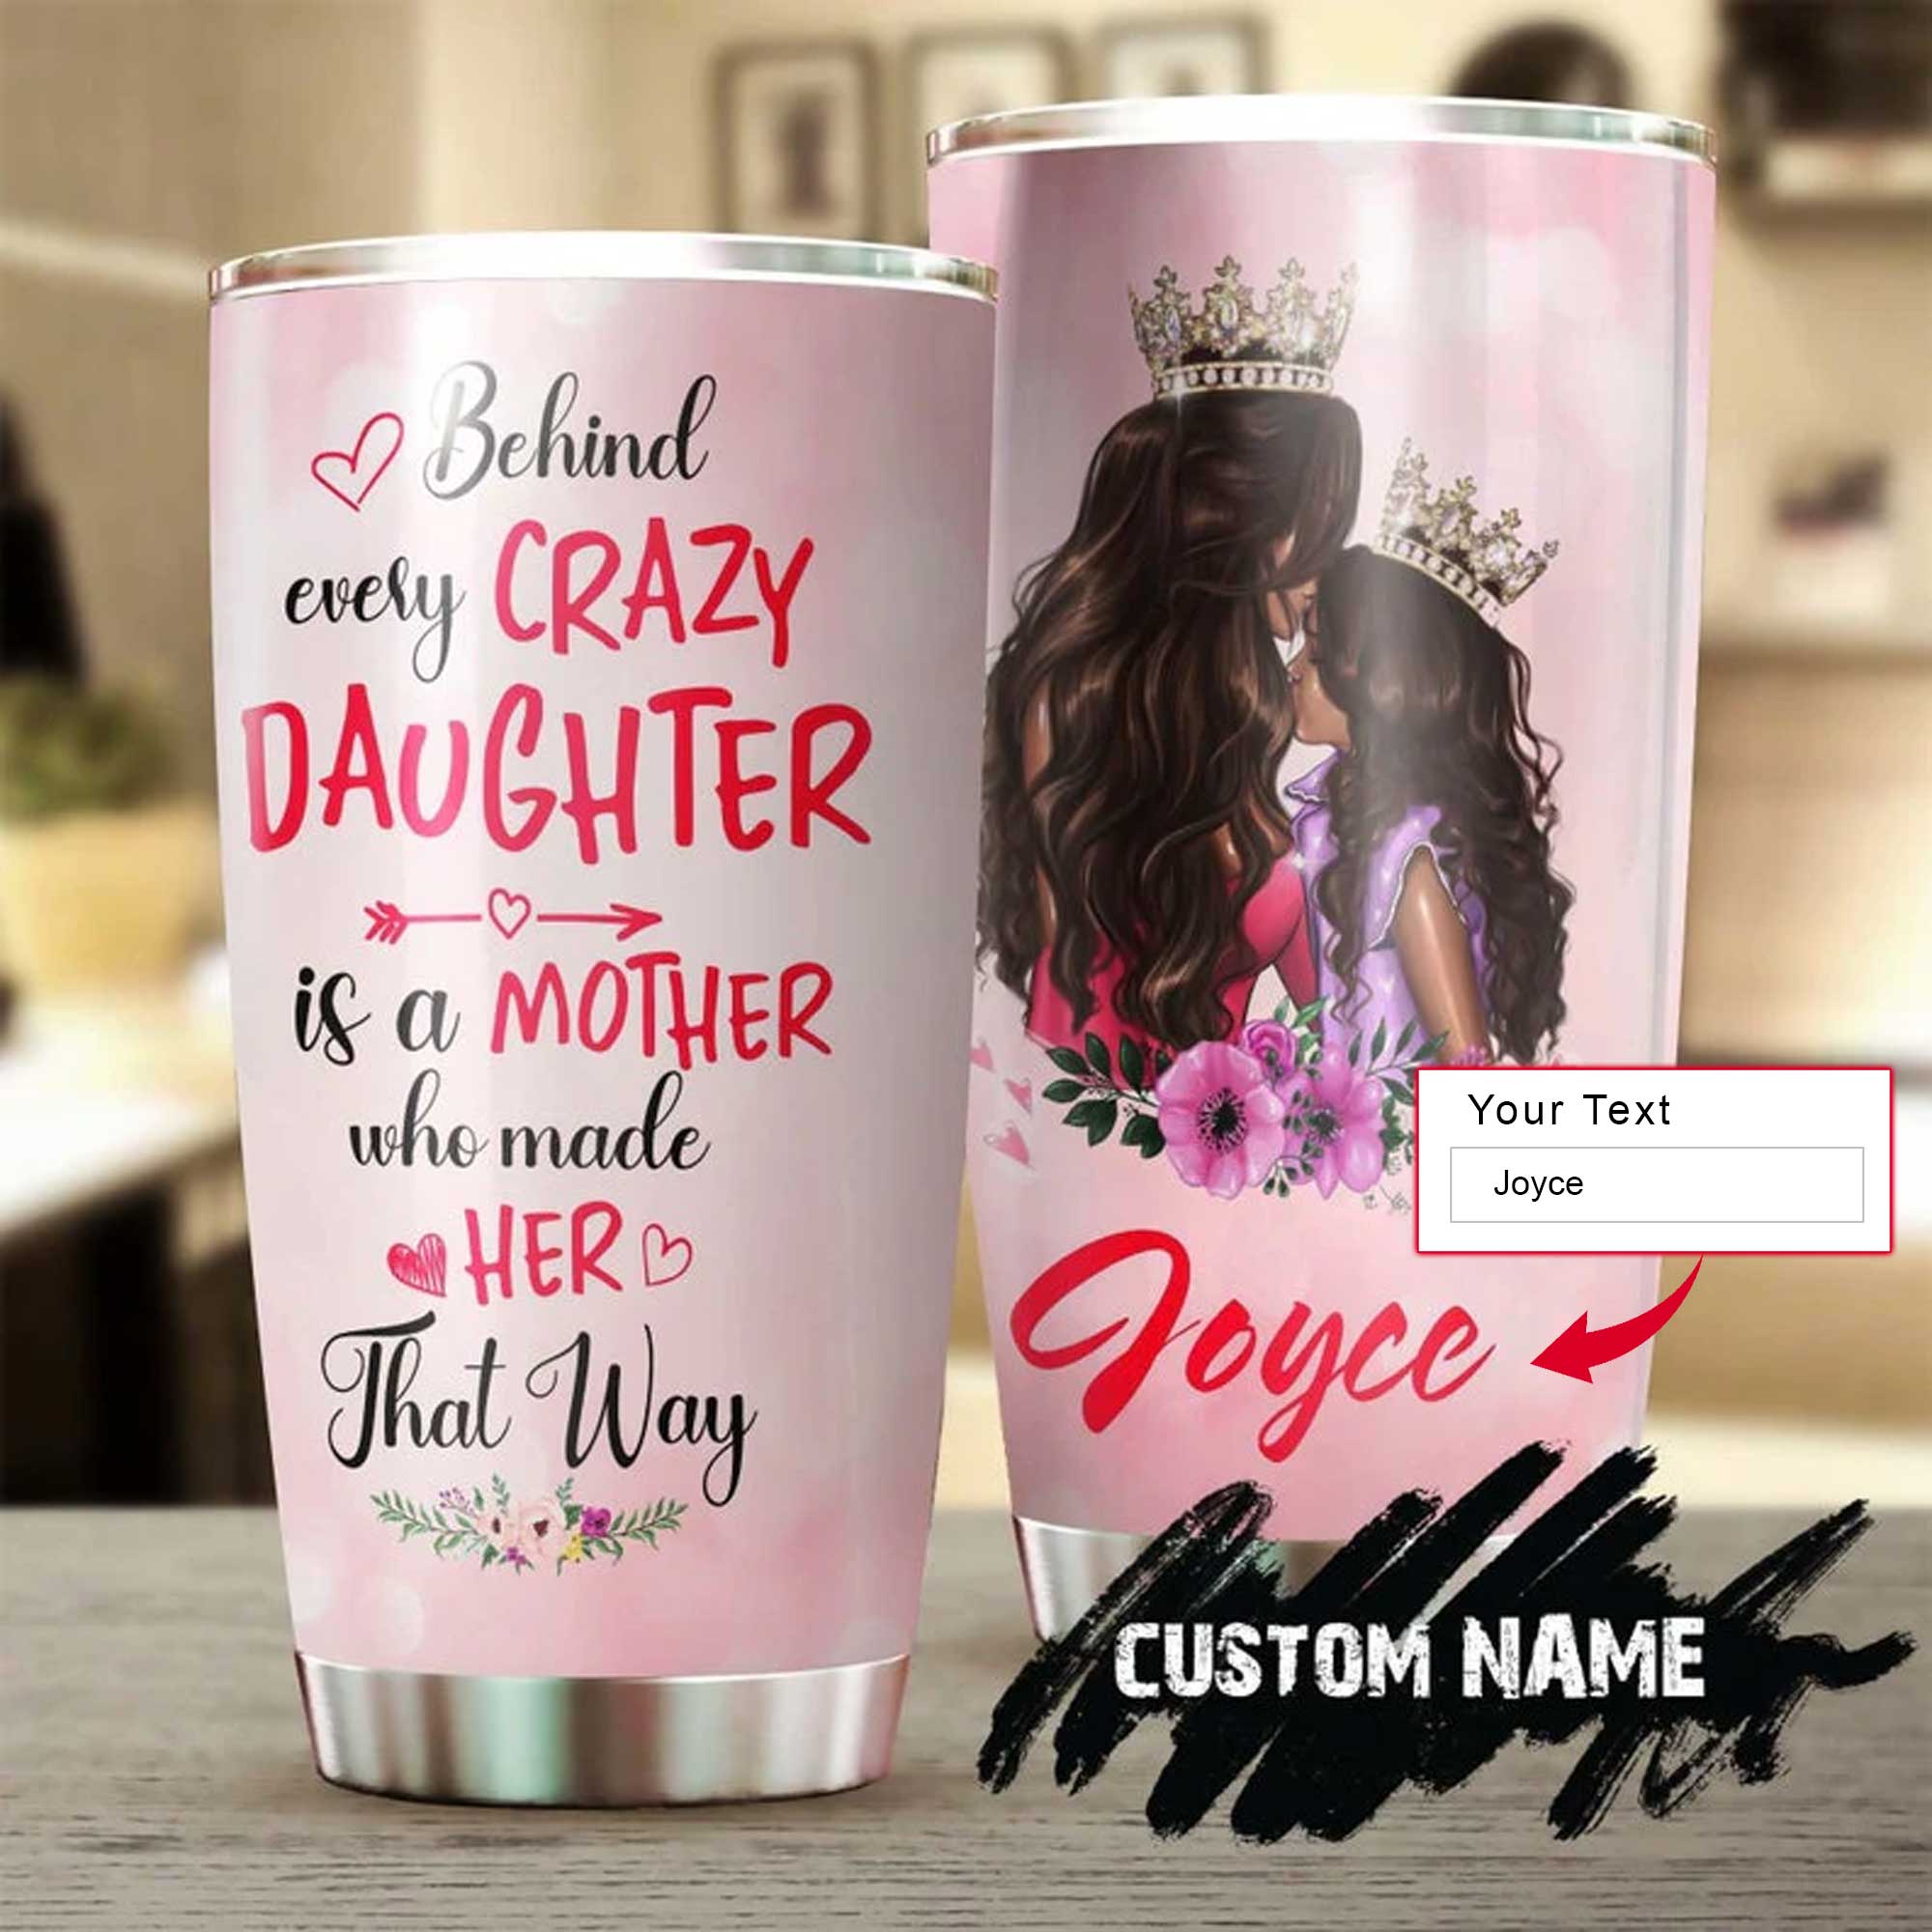 Personalized Mother's Day Gift Tumbler - Custom Gift For Mother's Day, Presents for Mom - Queen Mom, Princess Daughter Tumbler